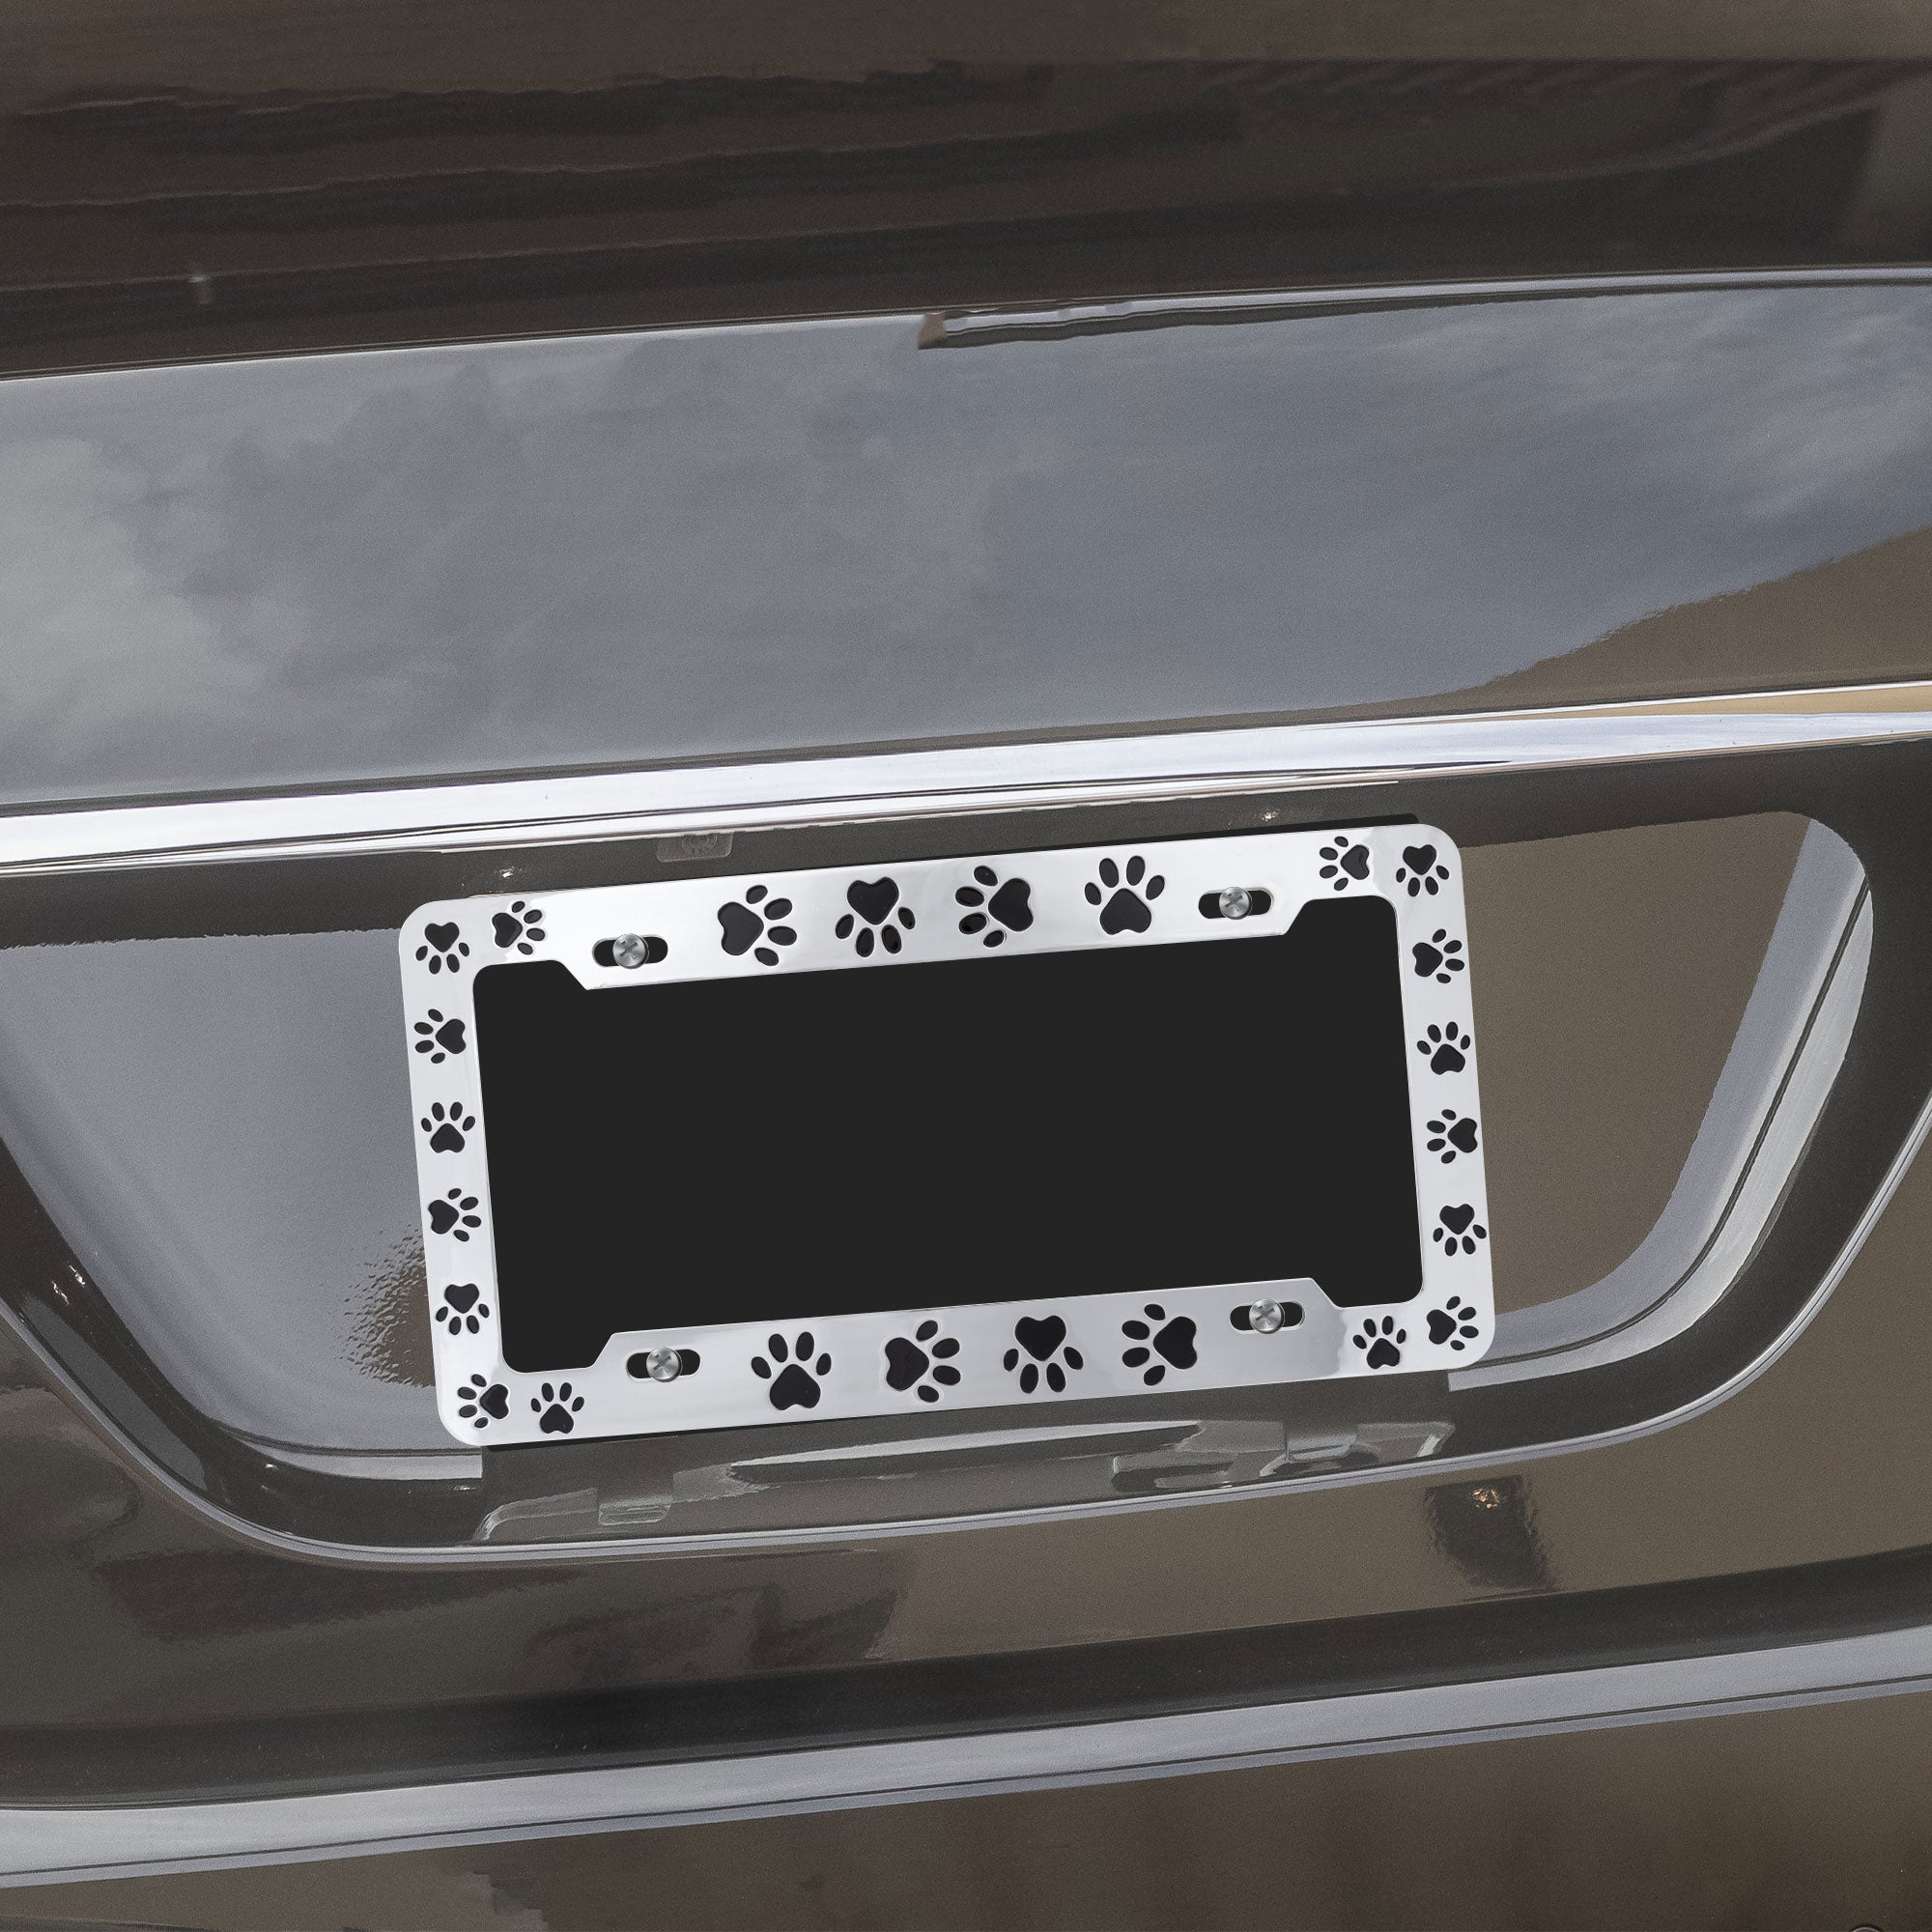 Paws Galore License Plate Frame - Single